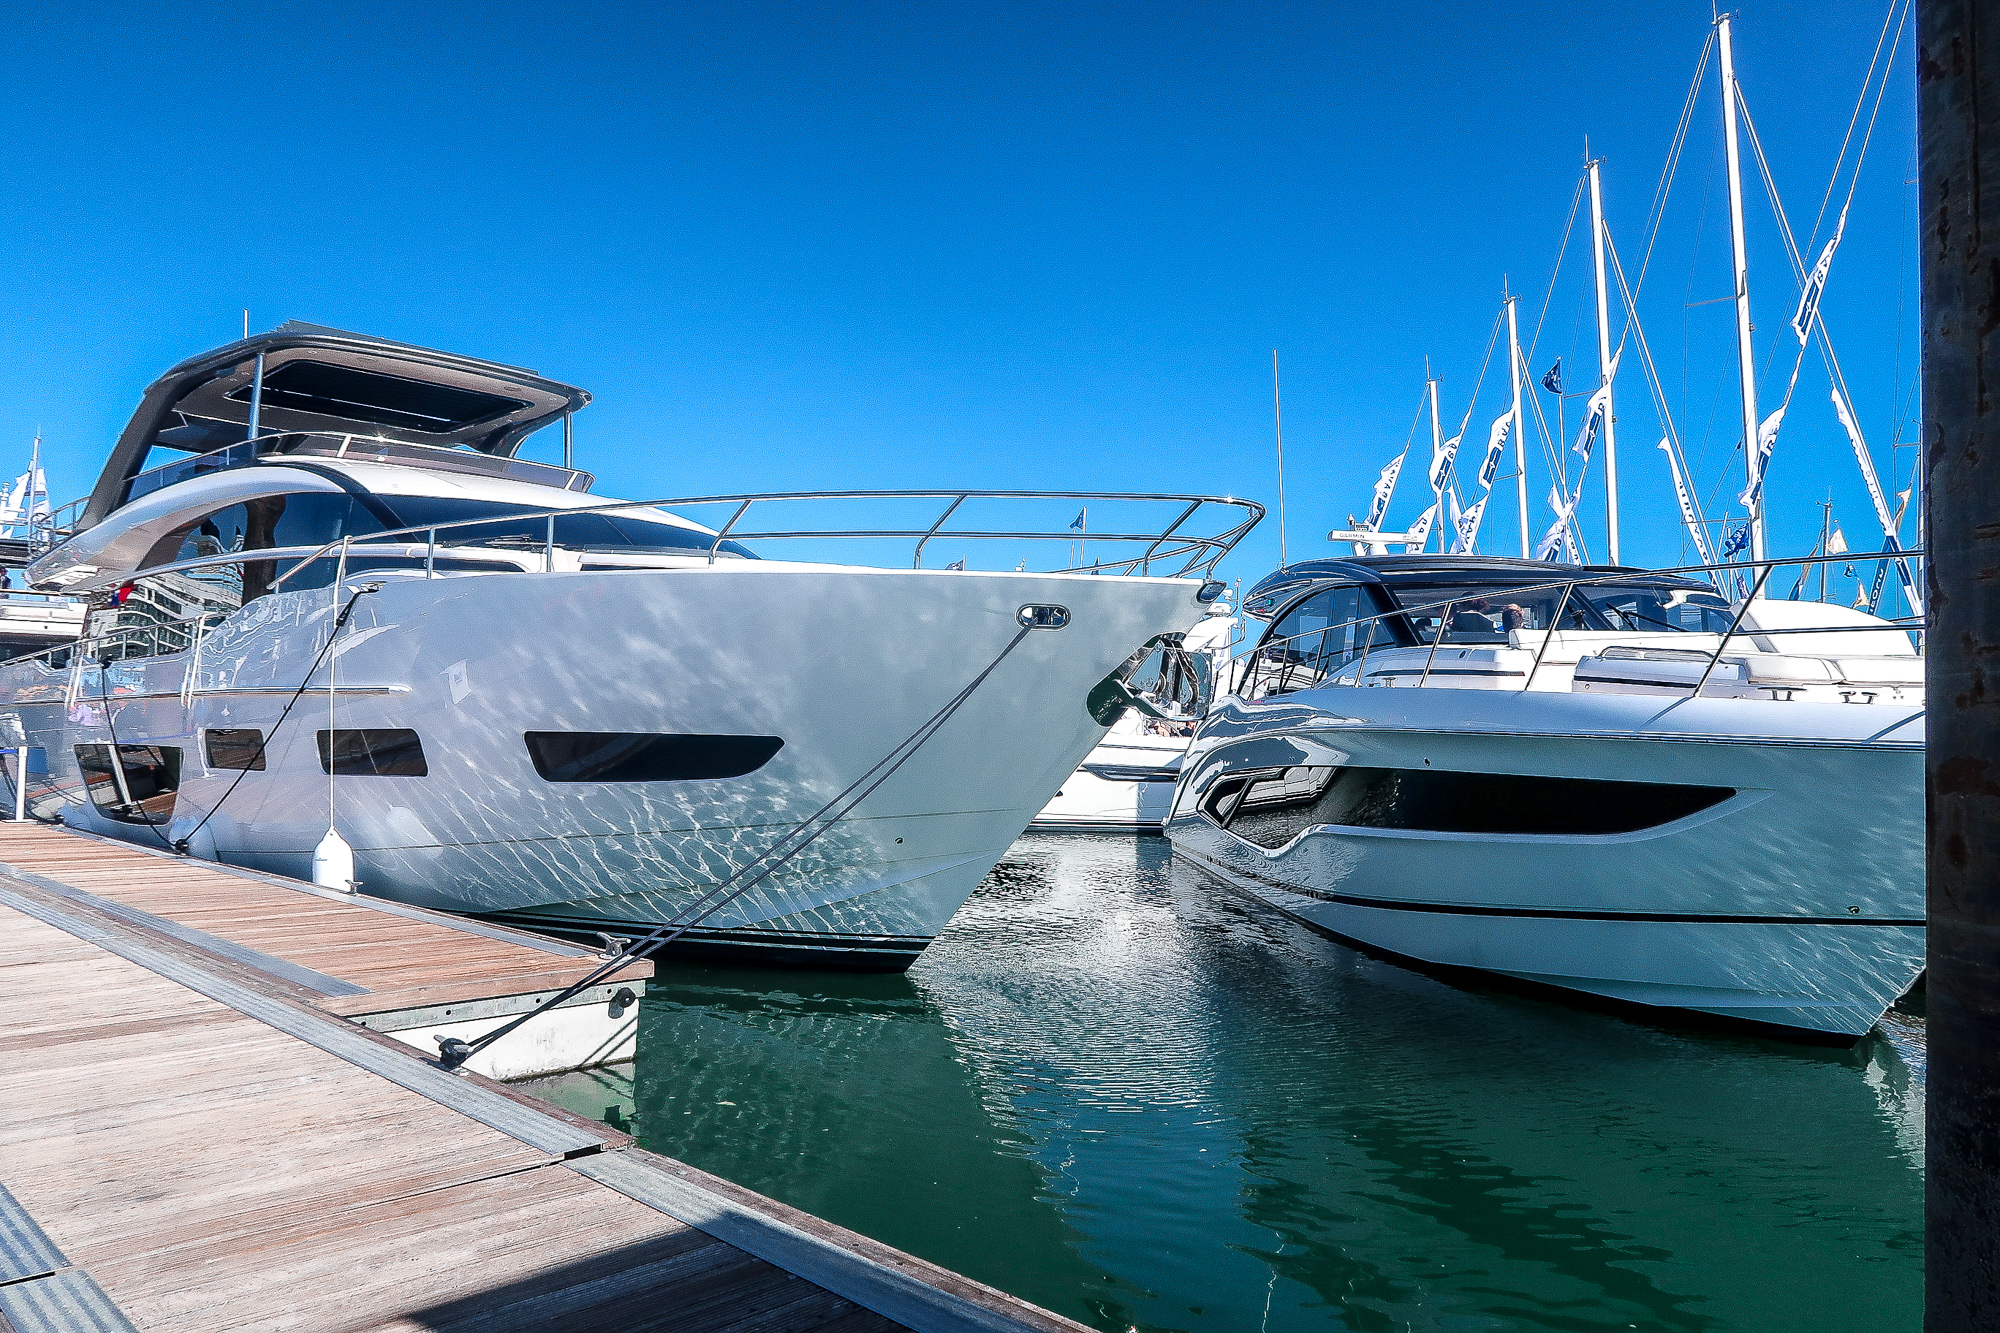 Southampton Boat Show: How To Get Discounted Tickets 49